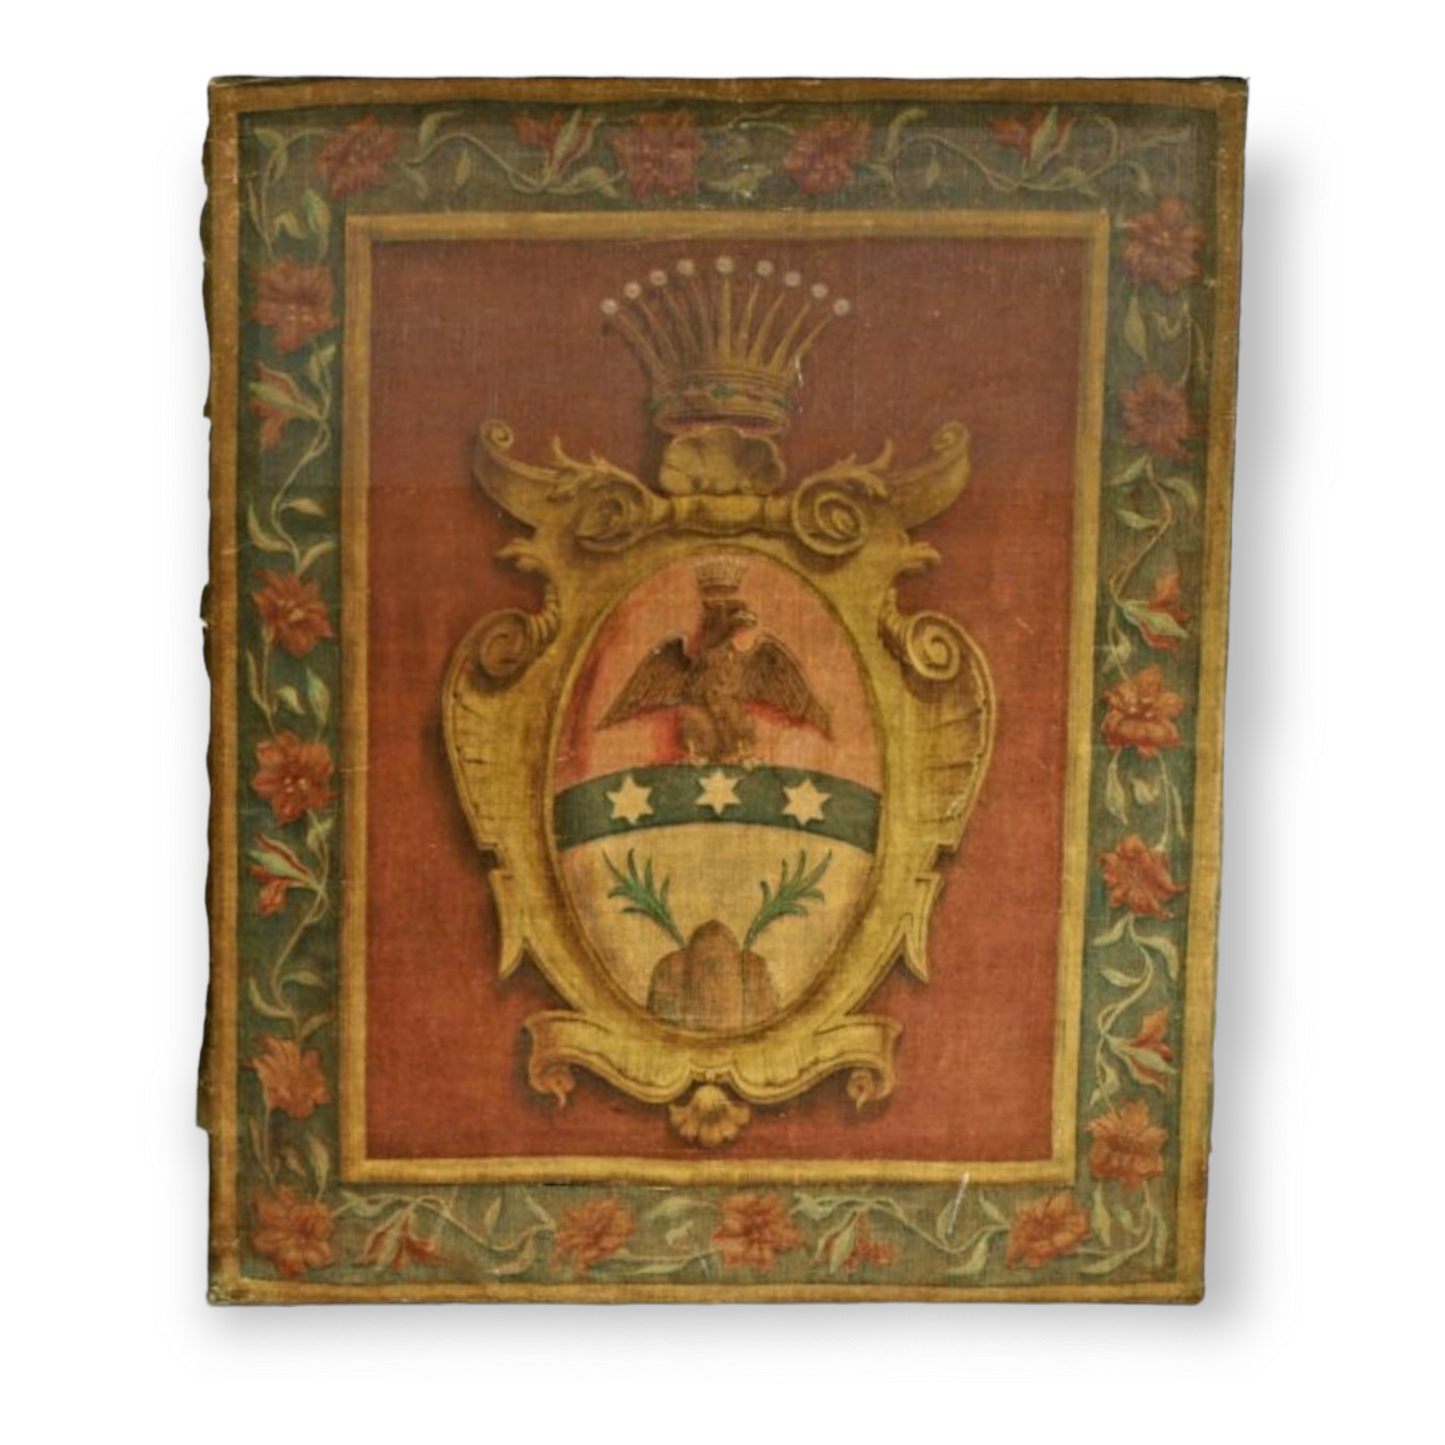 Large, Late 18th Century / Early 19th Century Italian Antique Coat of Arms